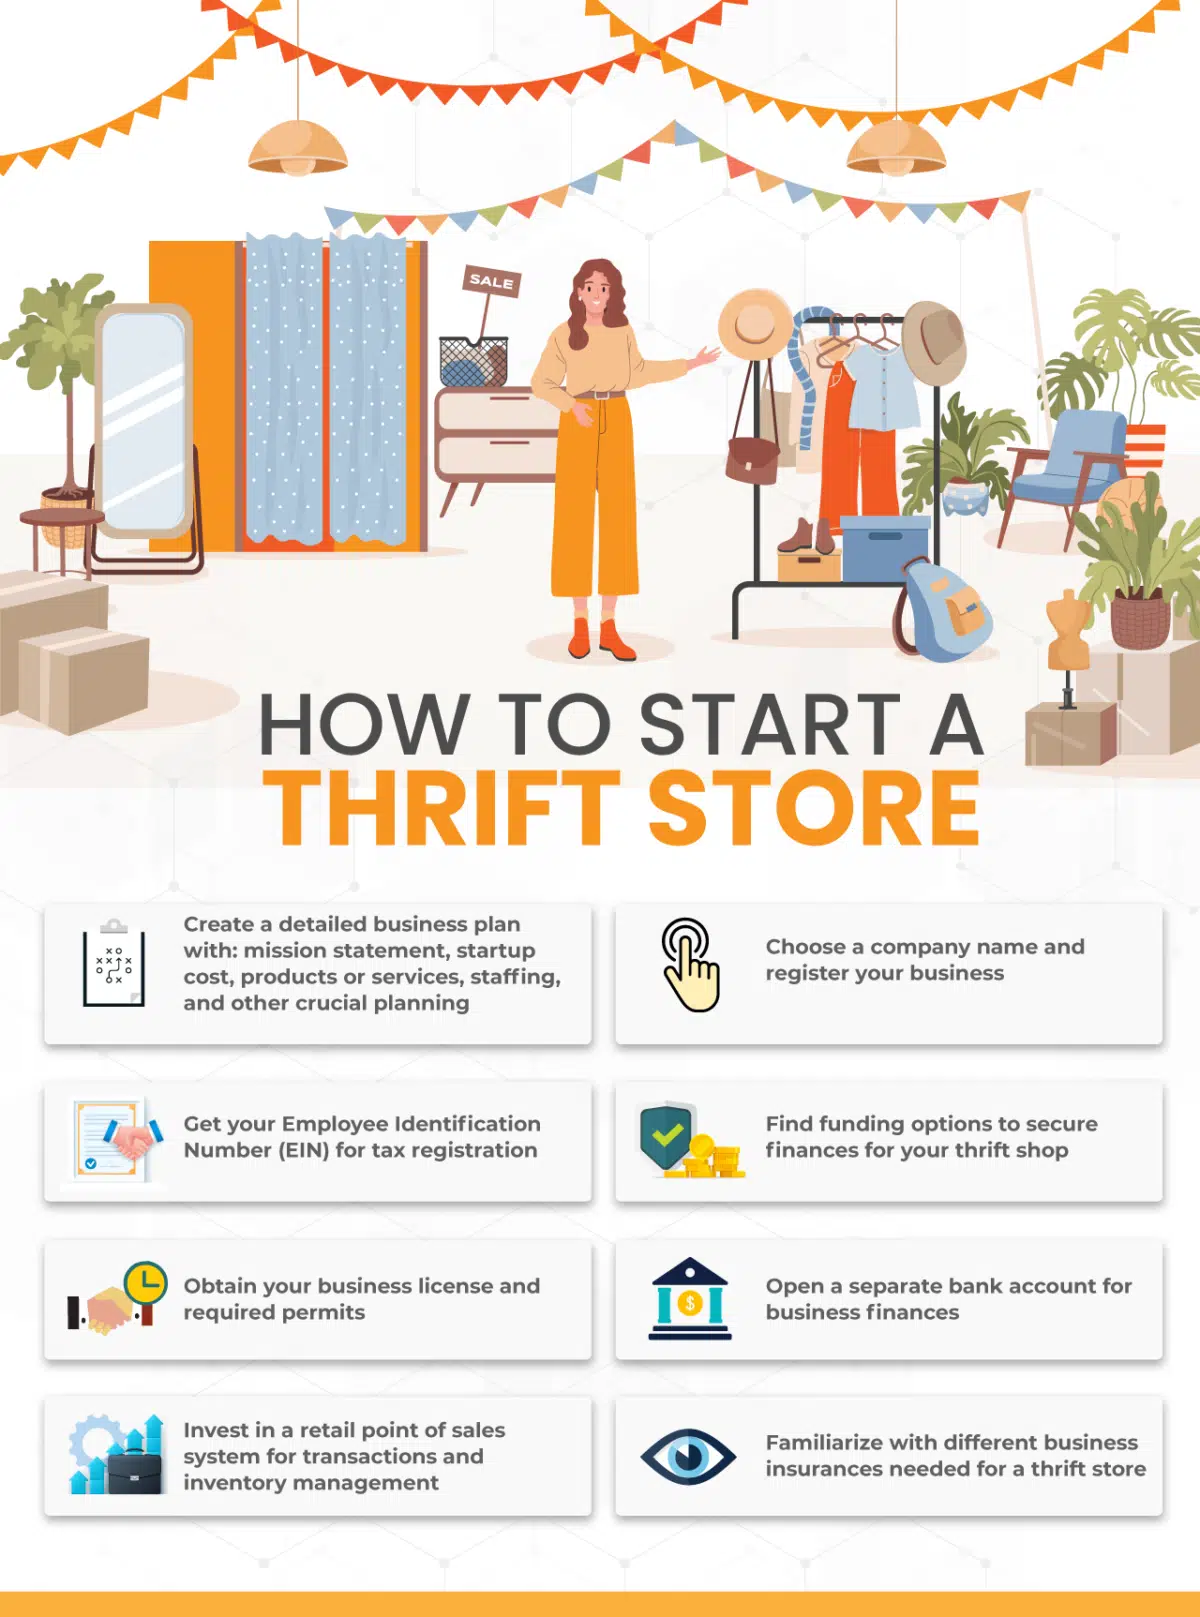 an infographic on how to start a thrift store